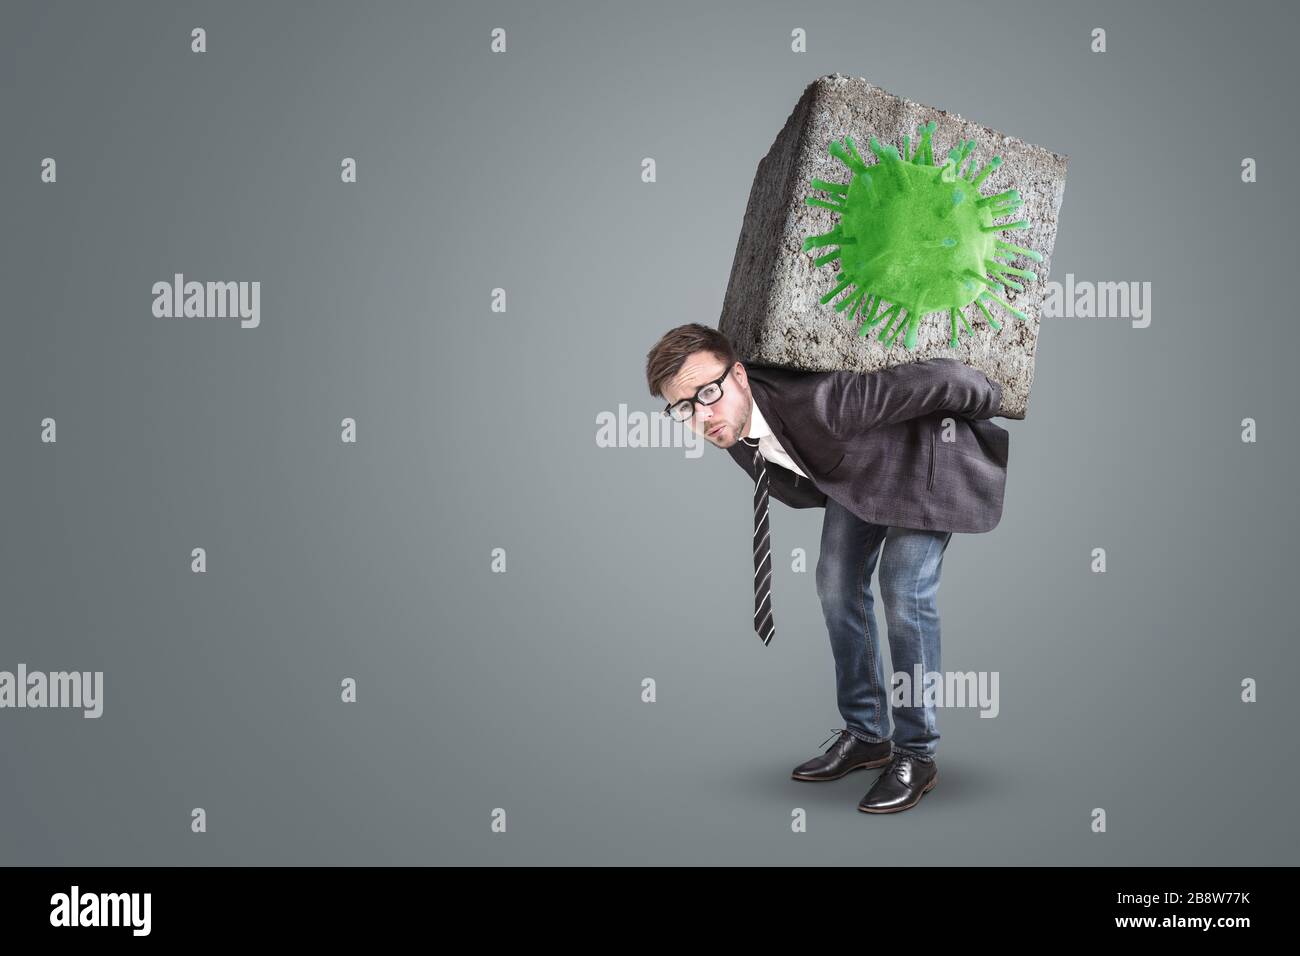 Businessman Under Pressure Caused By A Virus Stock Photo